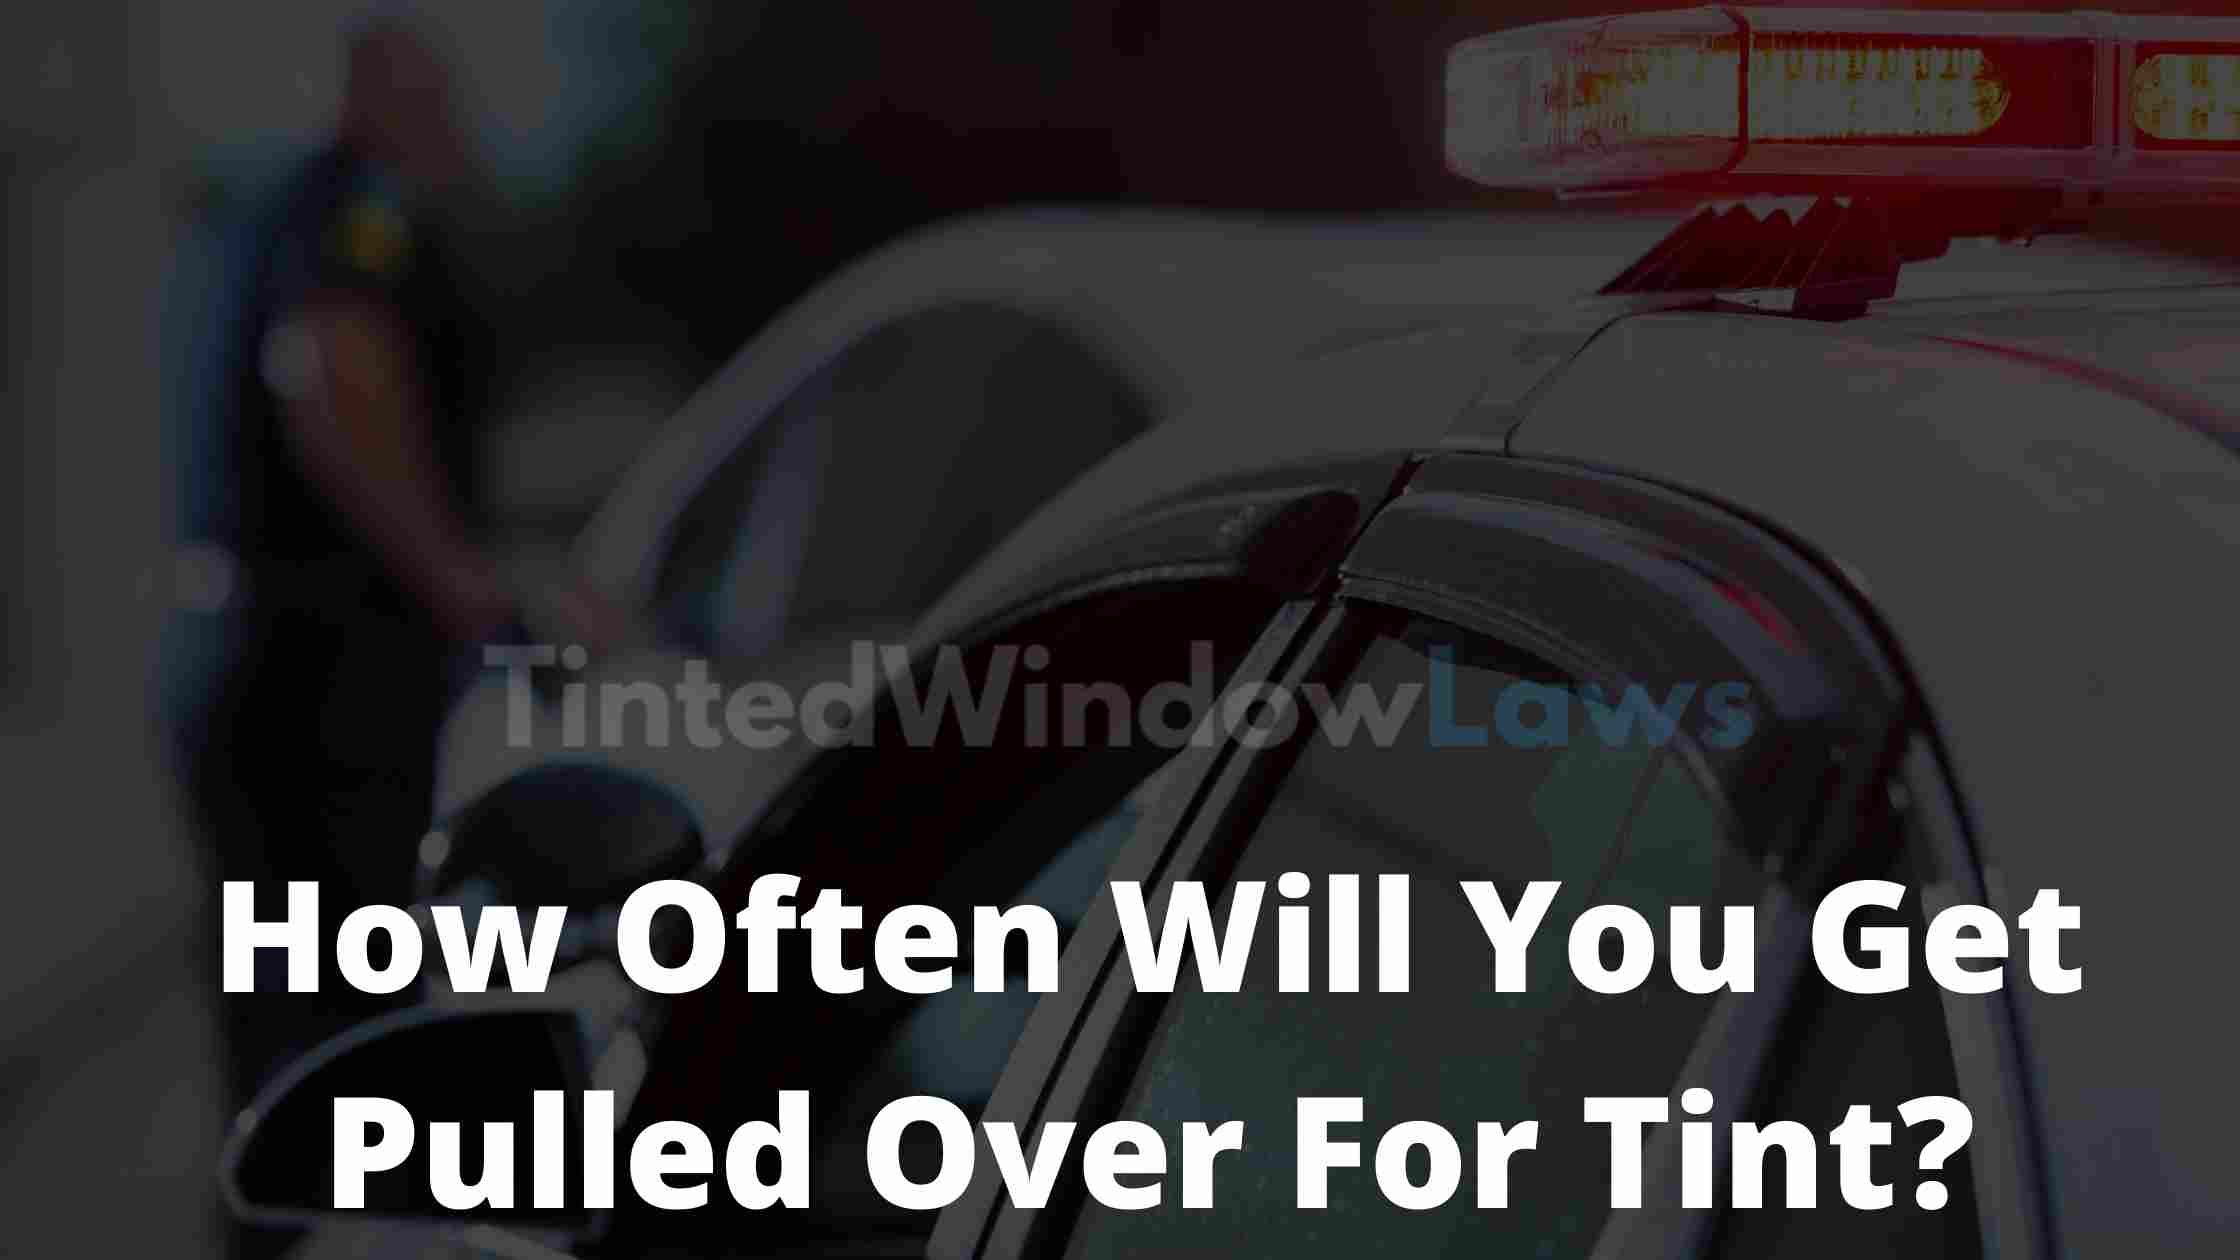 How-Often-Will-You-Get-Pulled-Over-For-Tint